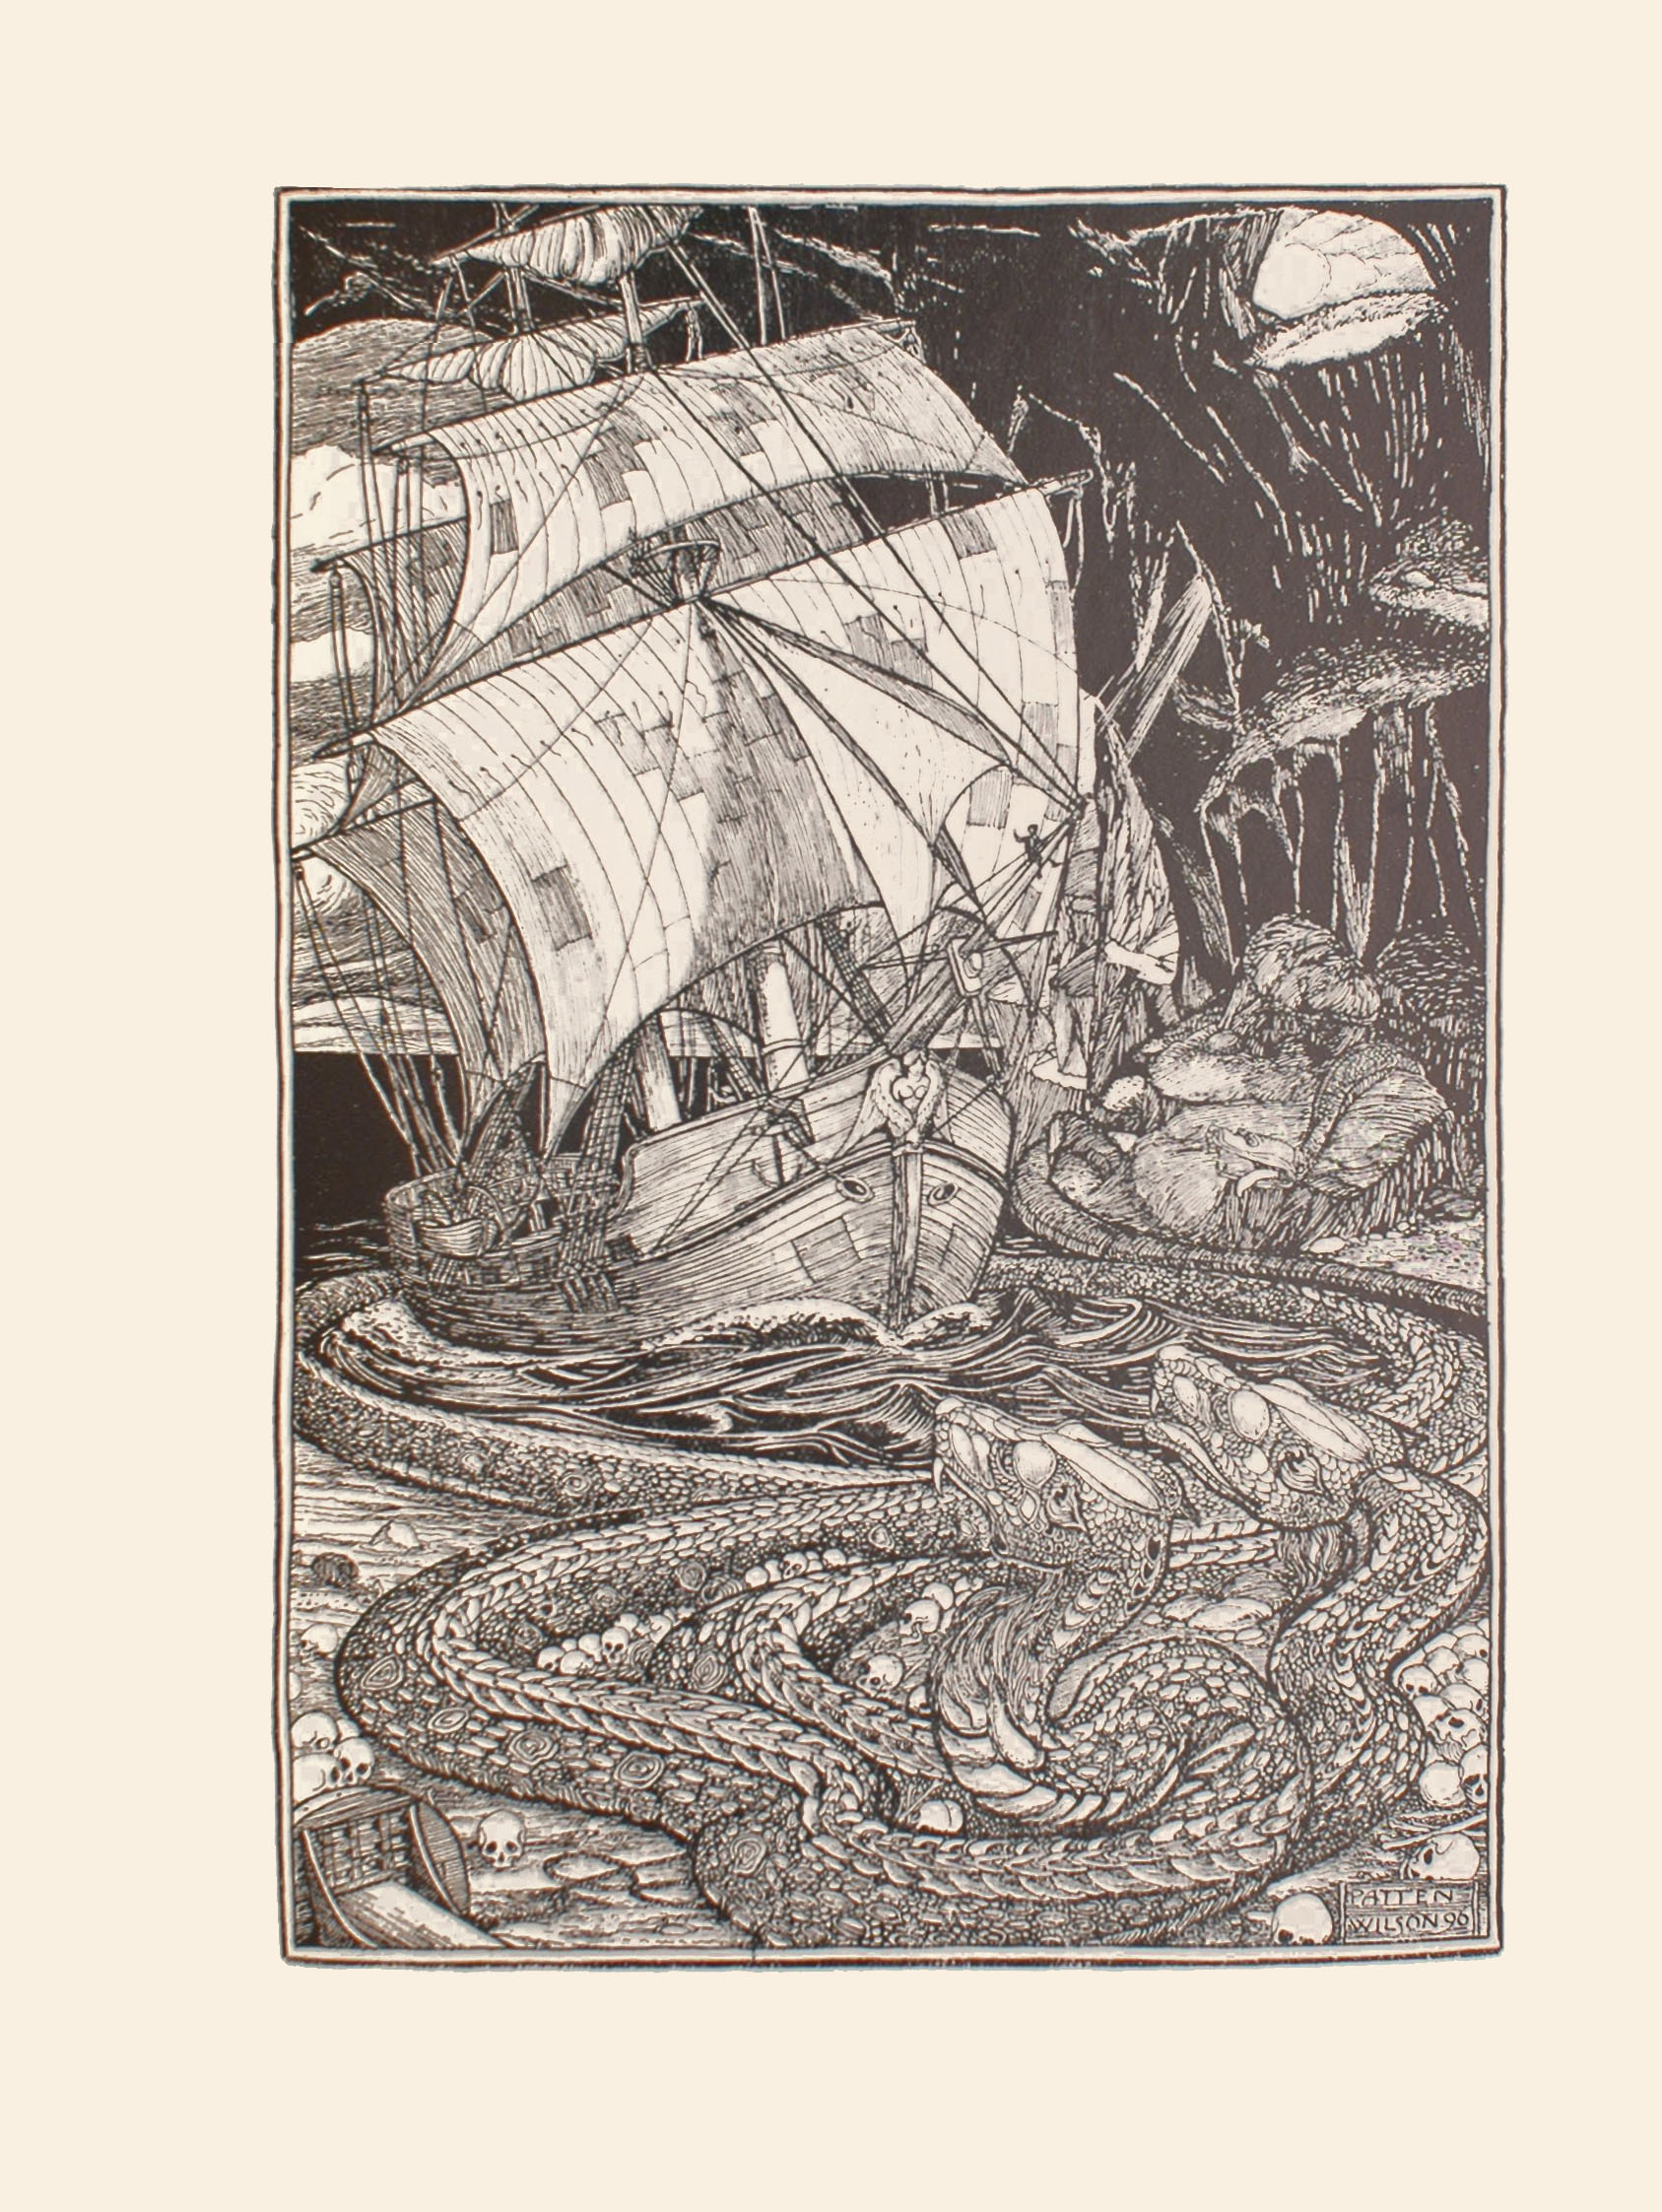 The image is of a tall wooden ship sailing in human skull infested dark waters surrounded by three snake like creatures or serpents The ship is in a dark cave with stalactites hanging from the ceiling. In the upper right corner of the image there is a small opening that depicts a light sky clouds and sunshine streaming into the cave There is also a large opening behind the ship where the sky and clouds are also seen The ship s sails are light coloured and patched with dark coloured rectangular pieces of cloth There is a dark human figure sitting high up on the ship s bowsprit The figure s right hand is raised There is a lighter human figure shown from the chest up on the upper deck of the ship His right arm is pointed towards the starboard side of the ship and he is wearing light coloured clothing and a cap on his head The ship s anchor is raised and the figurehead is of a nude angel with wings The snake like creatures have scaled bodies and are encircling the ship and the water it floats upon Two of the snakes are facing the ship in the lower right hand side of the image They are lying on the skull covered shore mouths slightly open with fangs protruding There is a third snake lying on a raised section of the shore in the mid ground facing the ship with its mouth open tongue hanging out of the left side and fangs protruding The image is displayed vertically